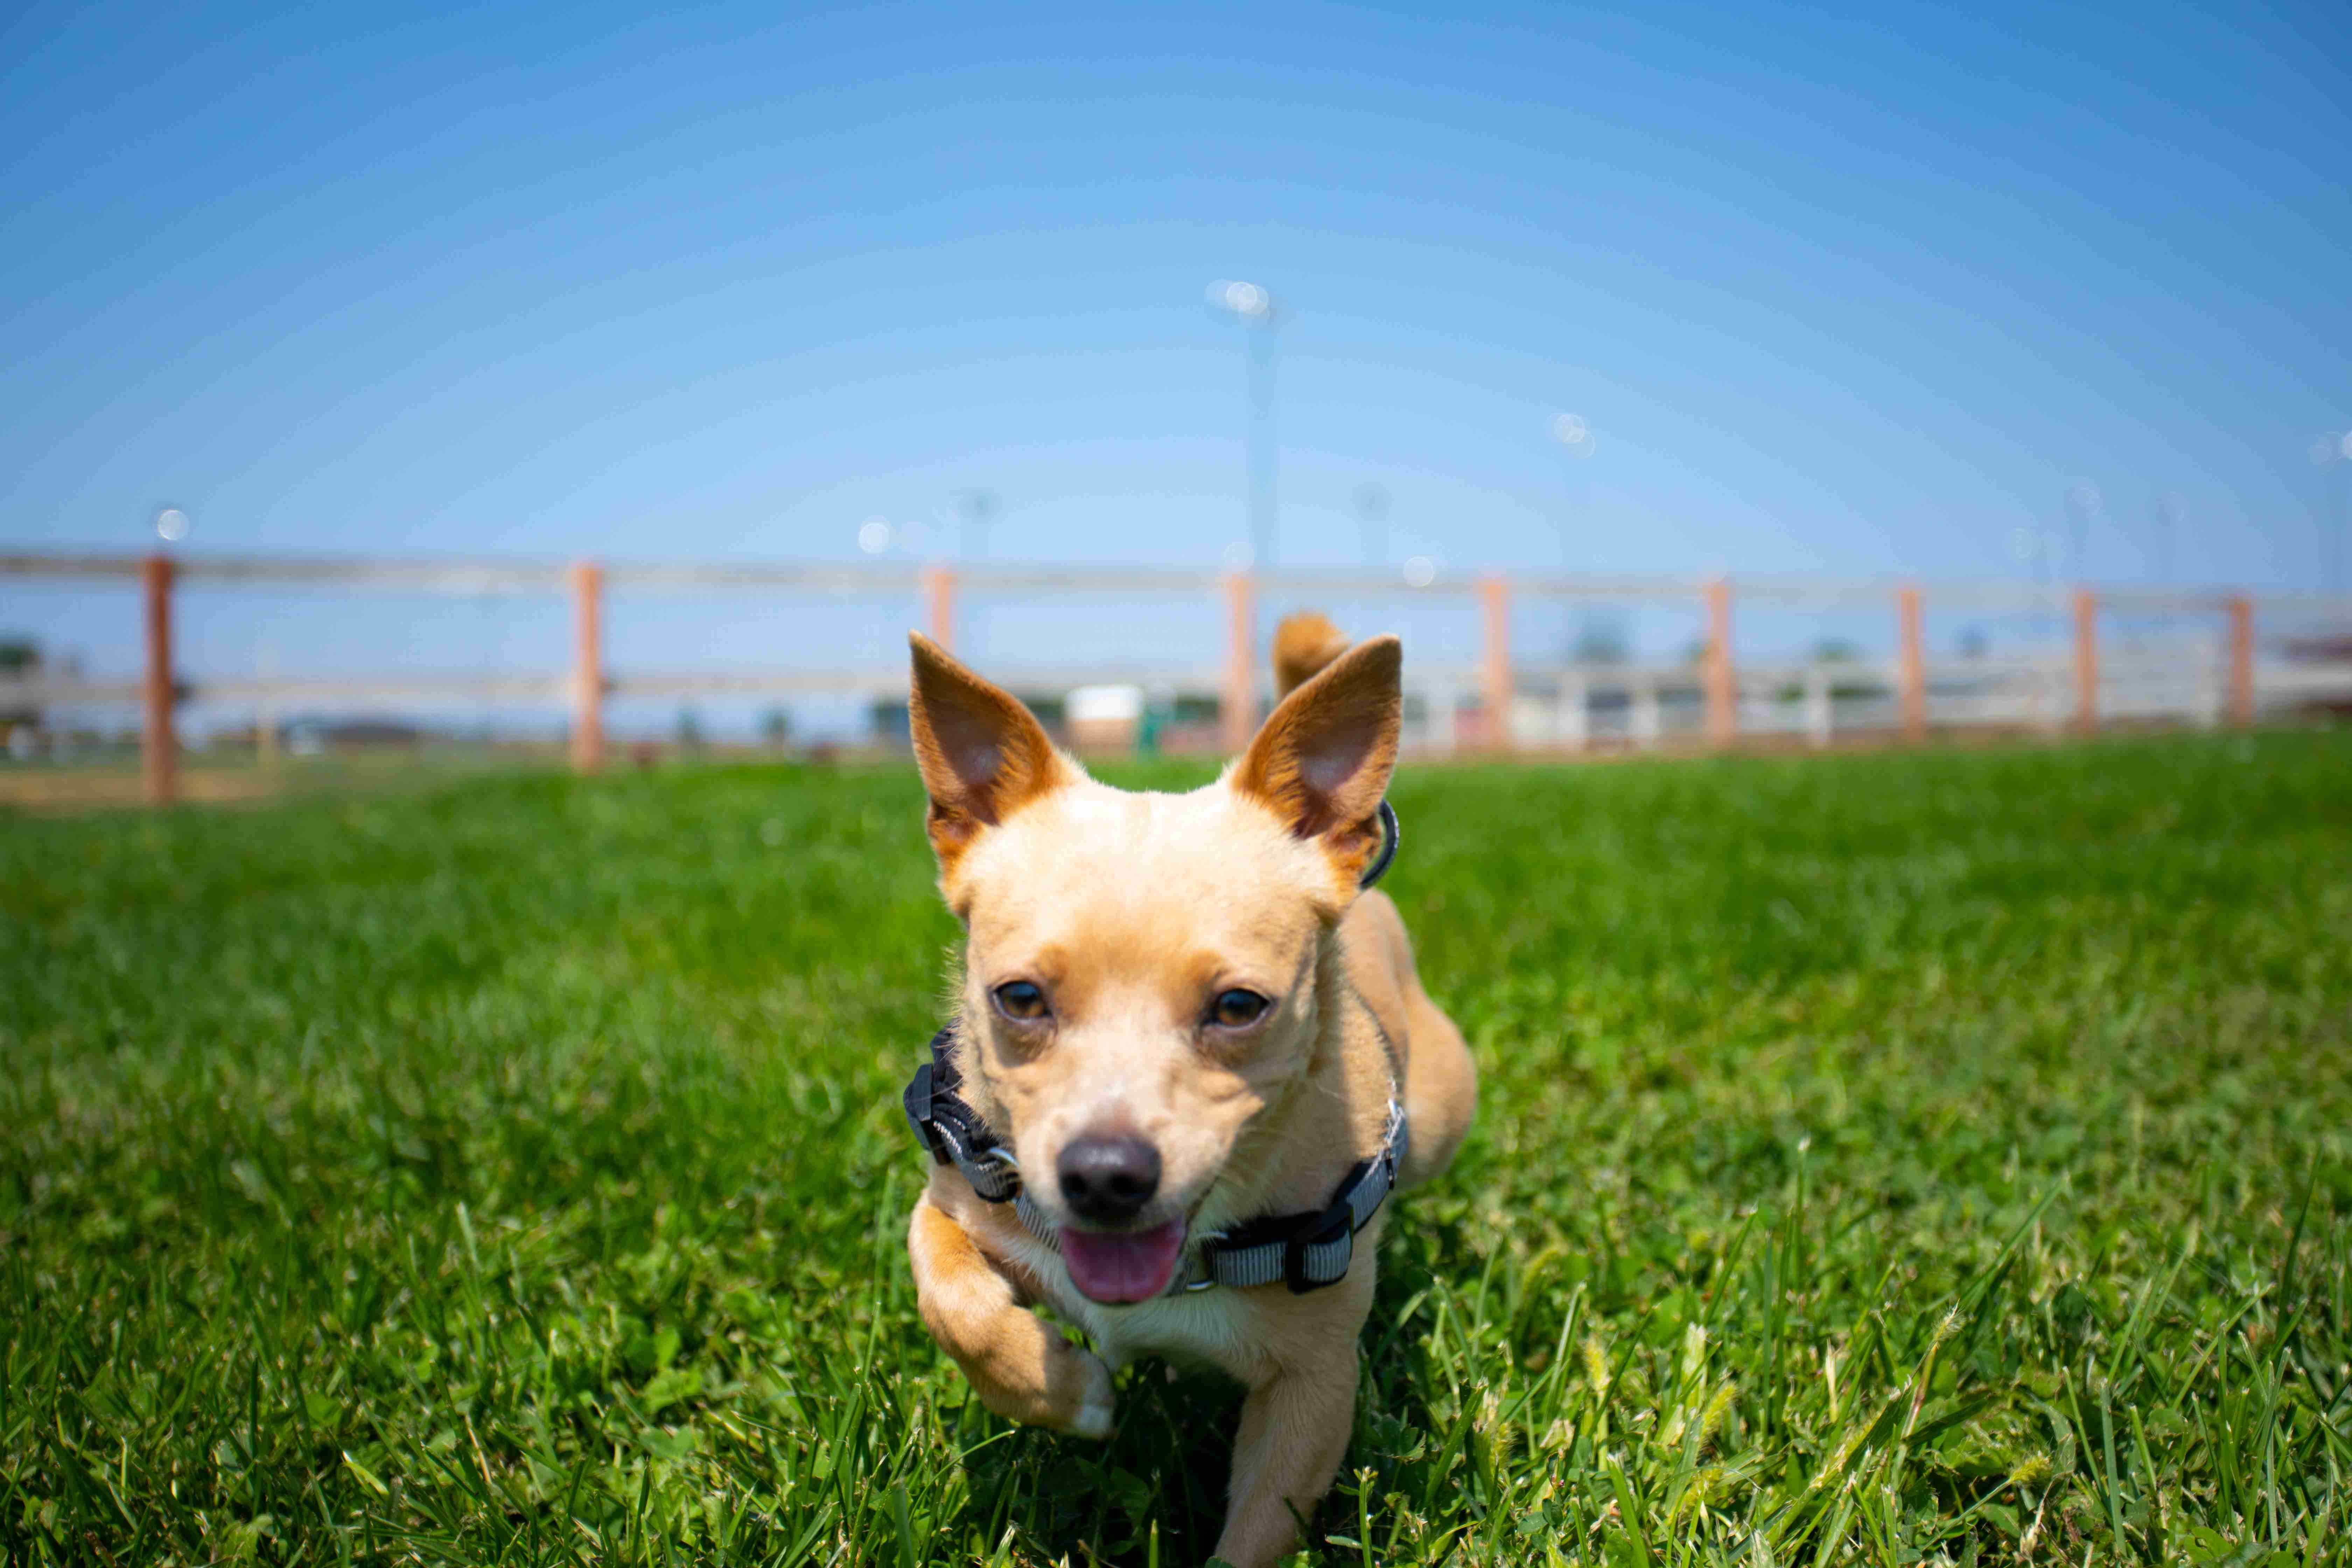 Should I seek professional help for my Chihuahua's aggression?